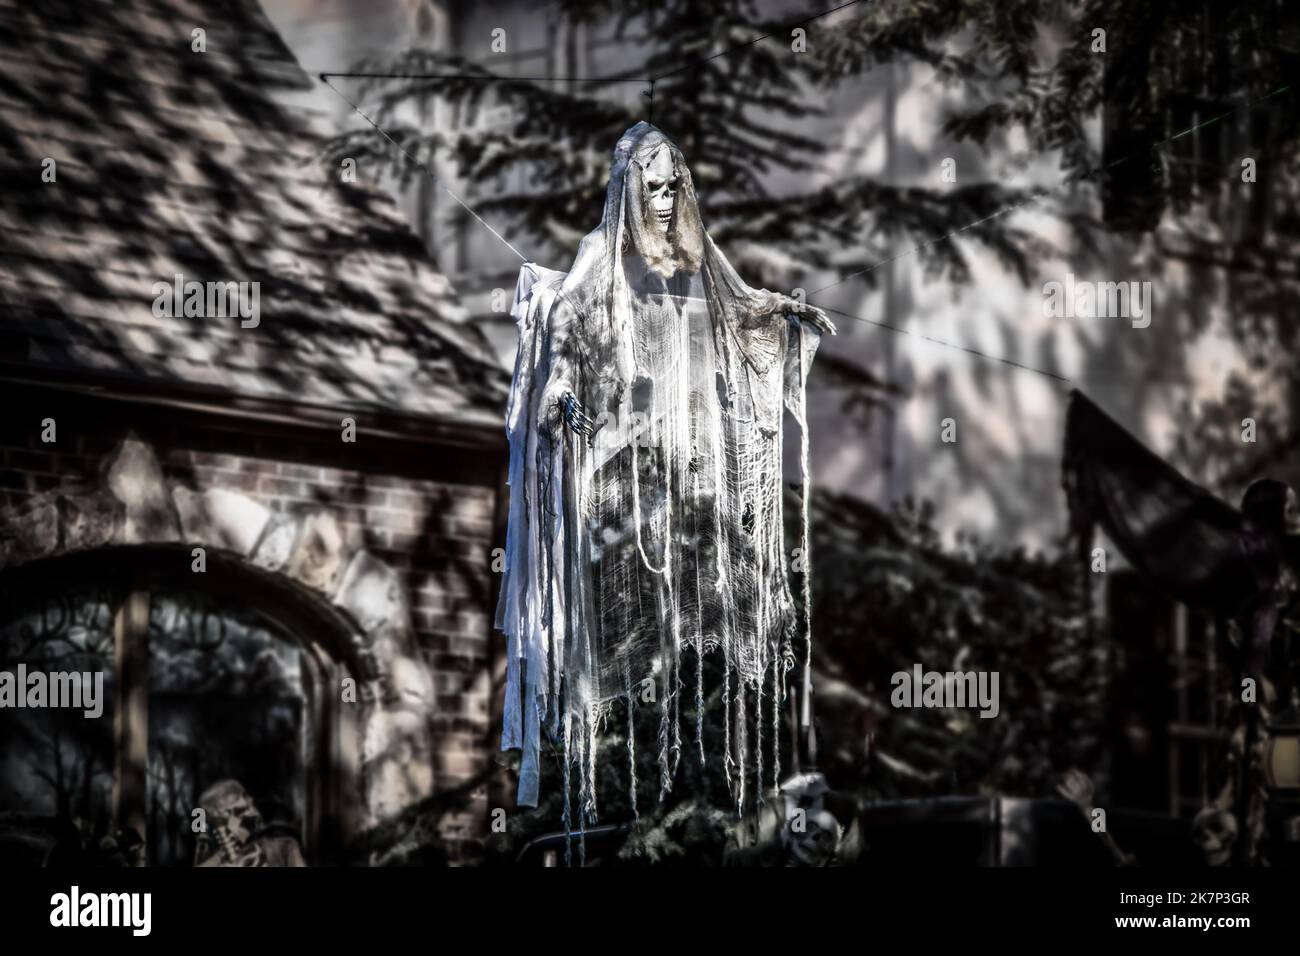 Ragged ghost decorating neighborhood for Halloween -hanging from tree - dark gothic feel - almost monotone Stock Photo